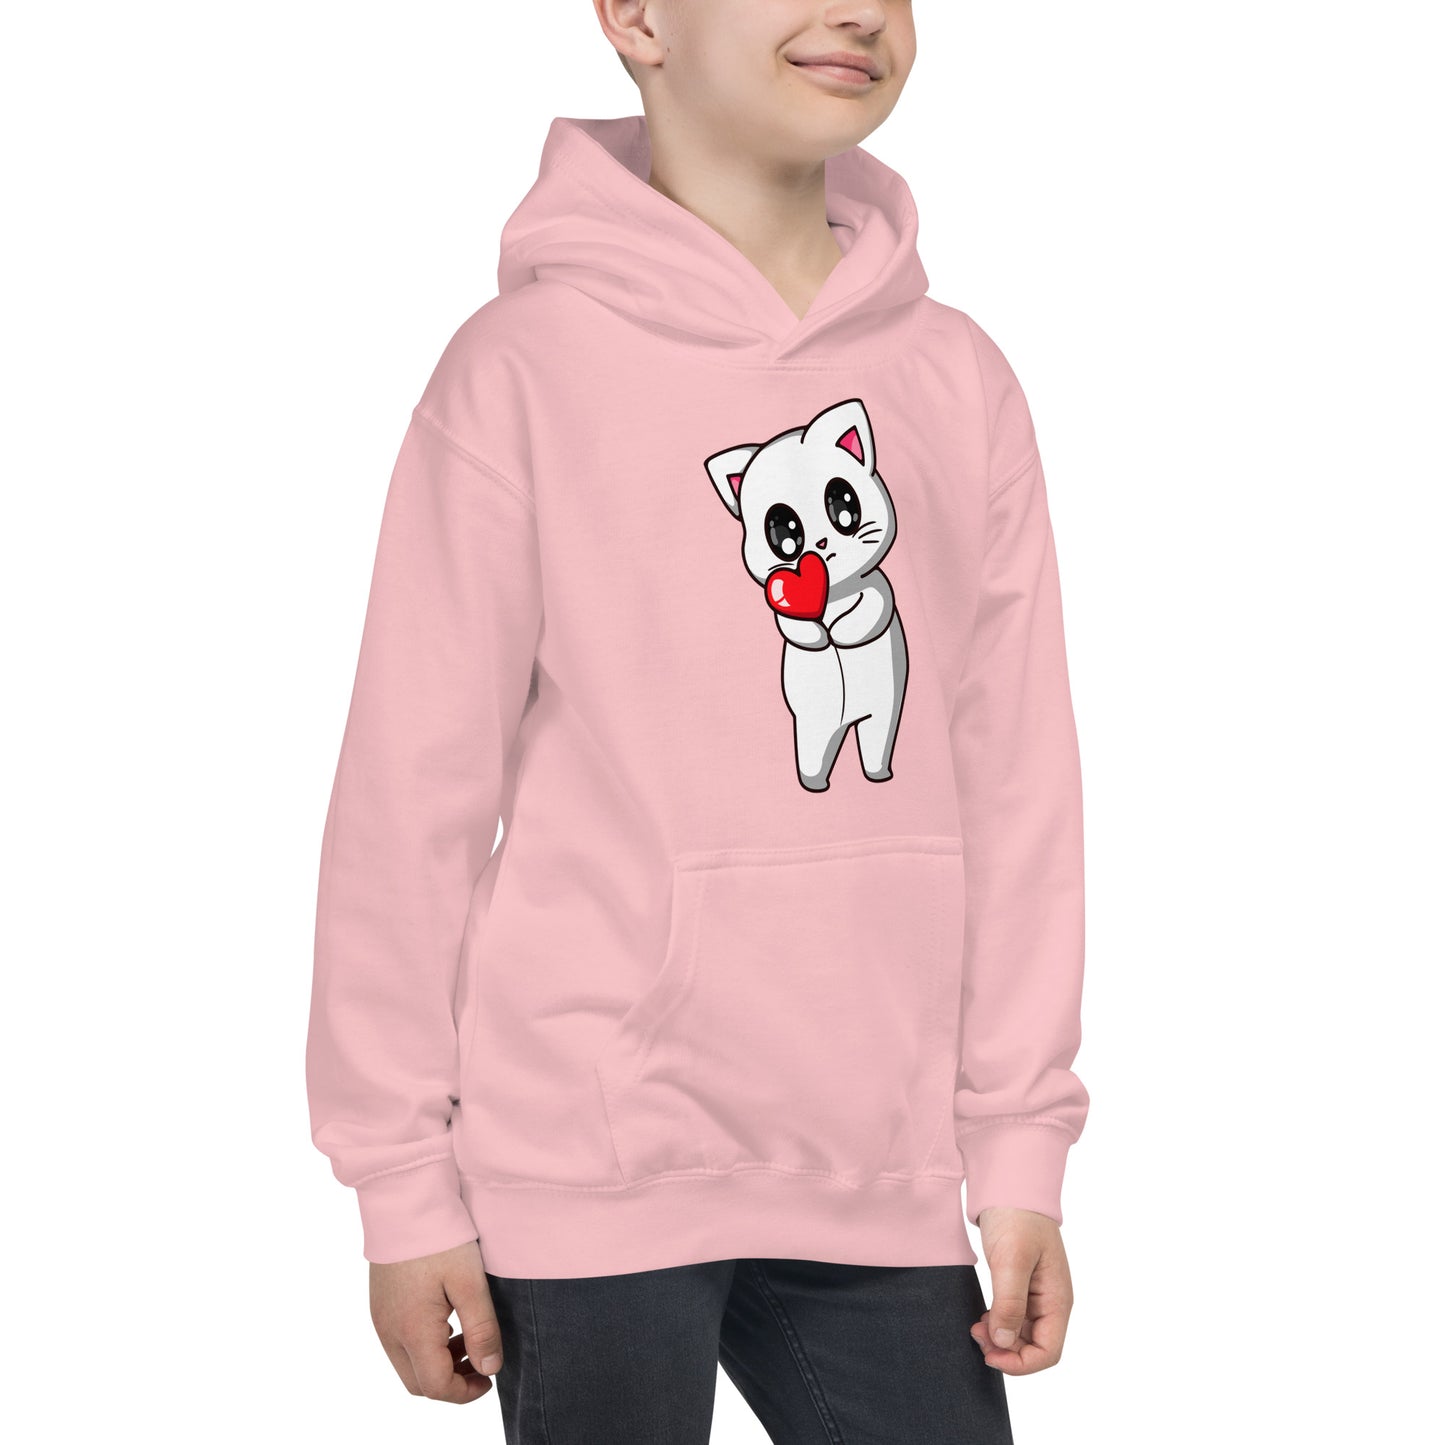 Cute Cat with Heart Hoodie, No. 0166